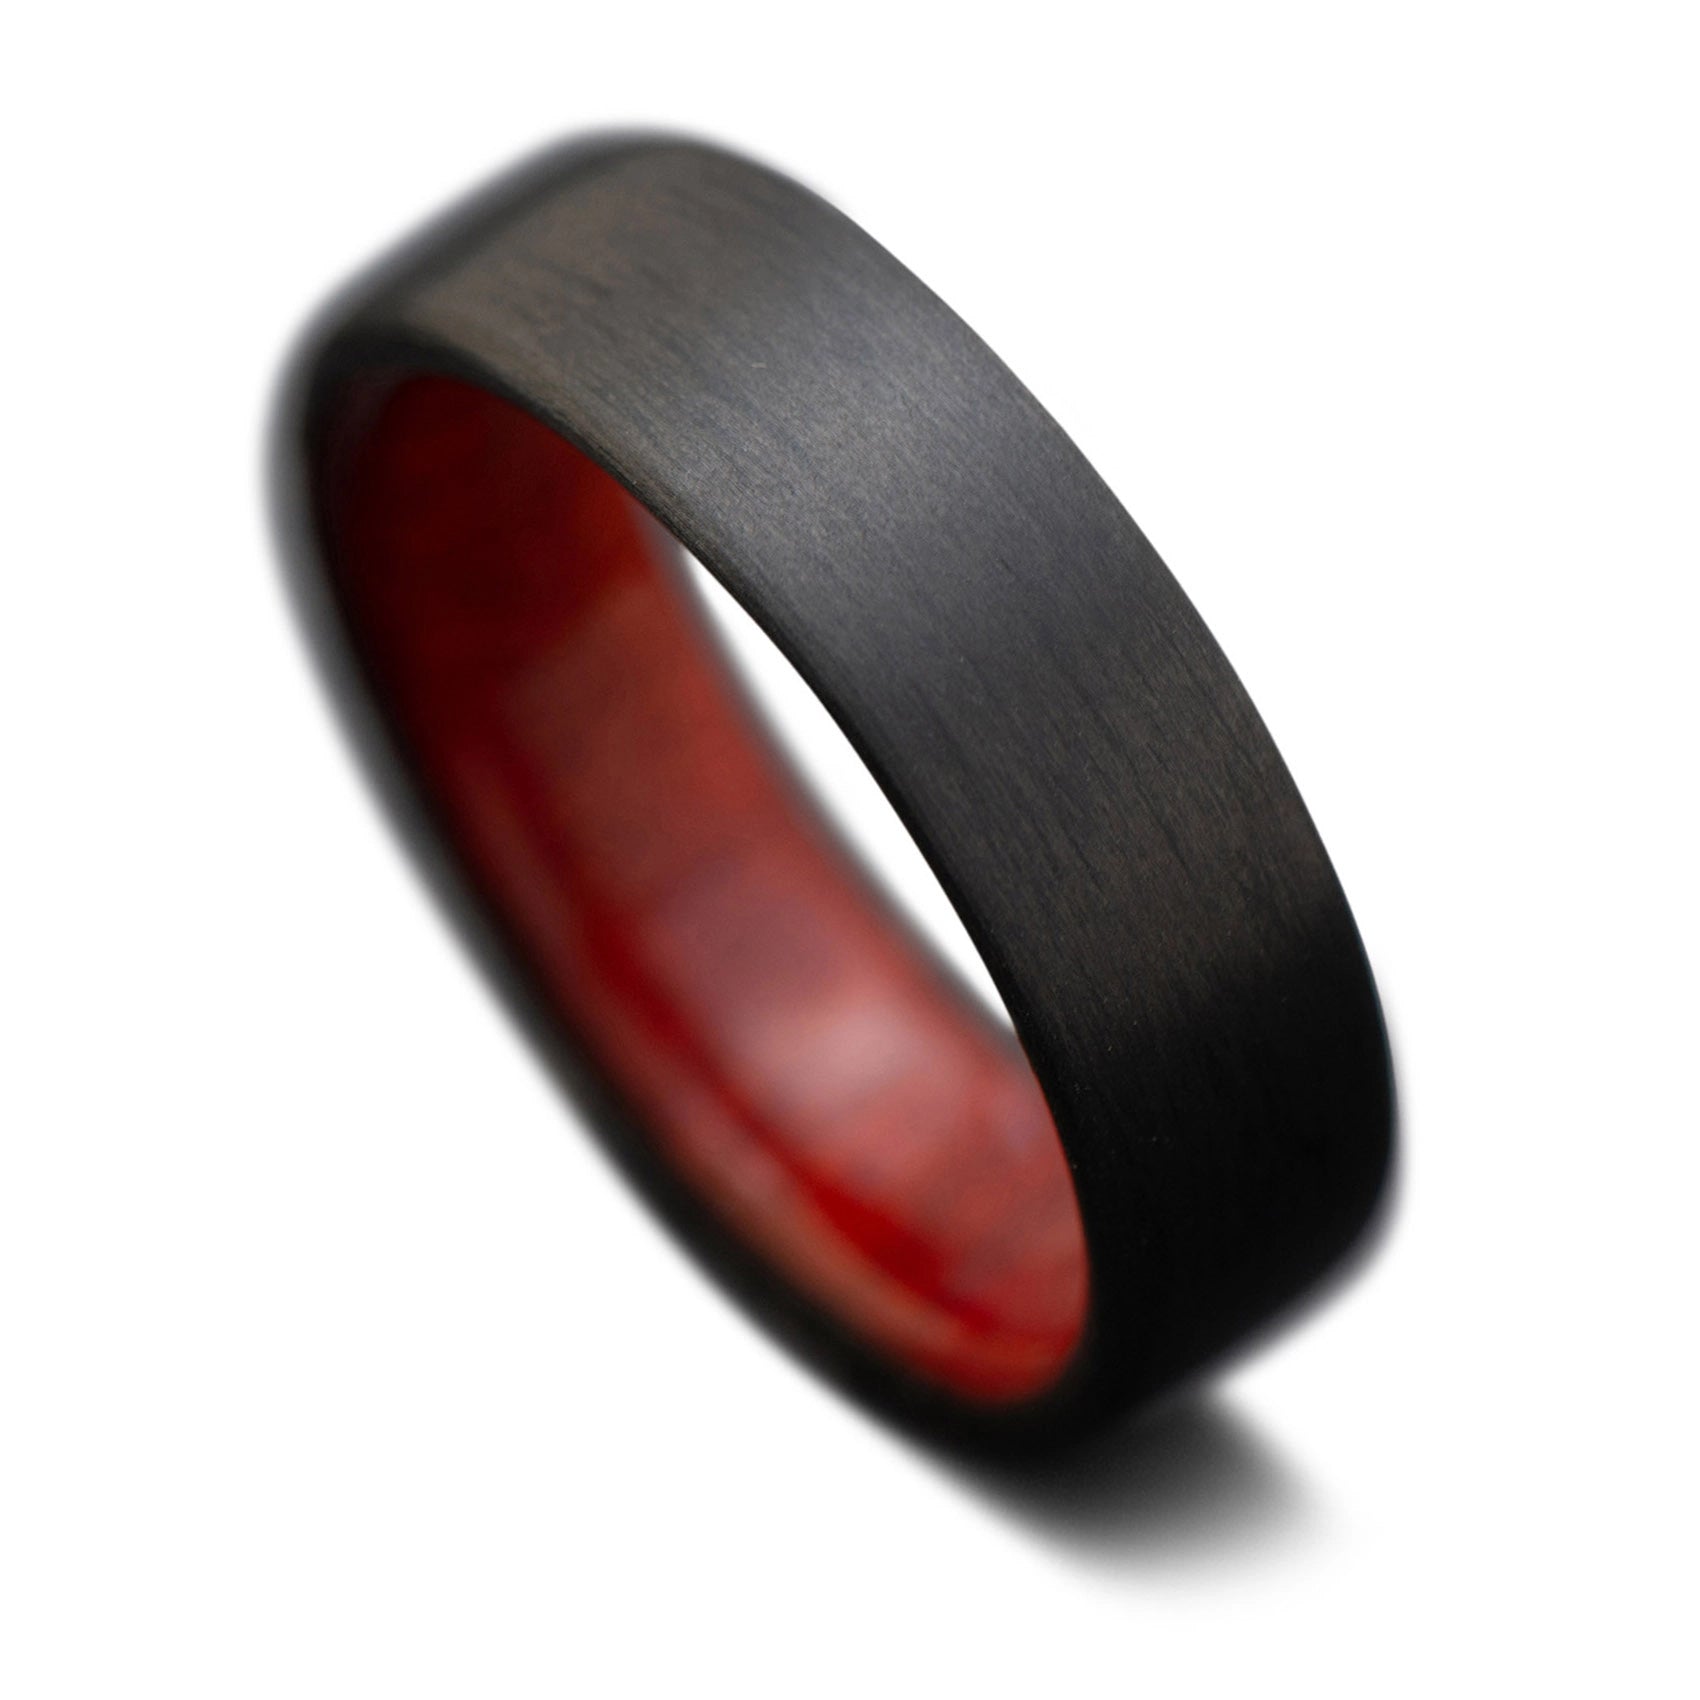  CarbonUni Core Ring with Bloodwood inner sleeve, 7mm -THE QUANTUM